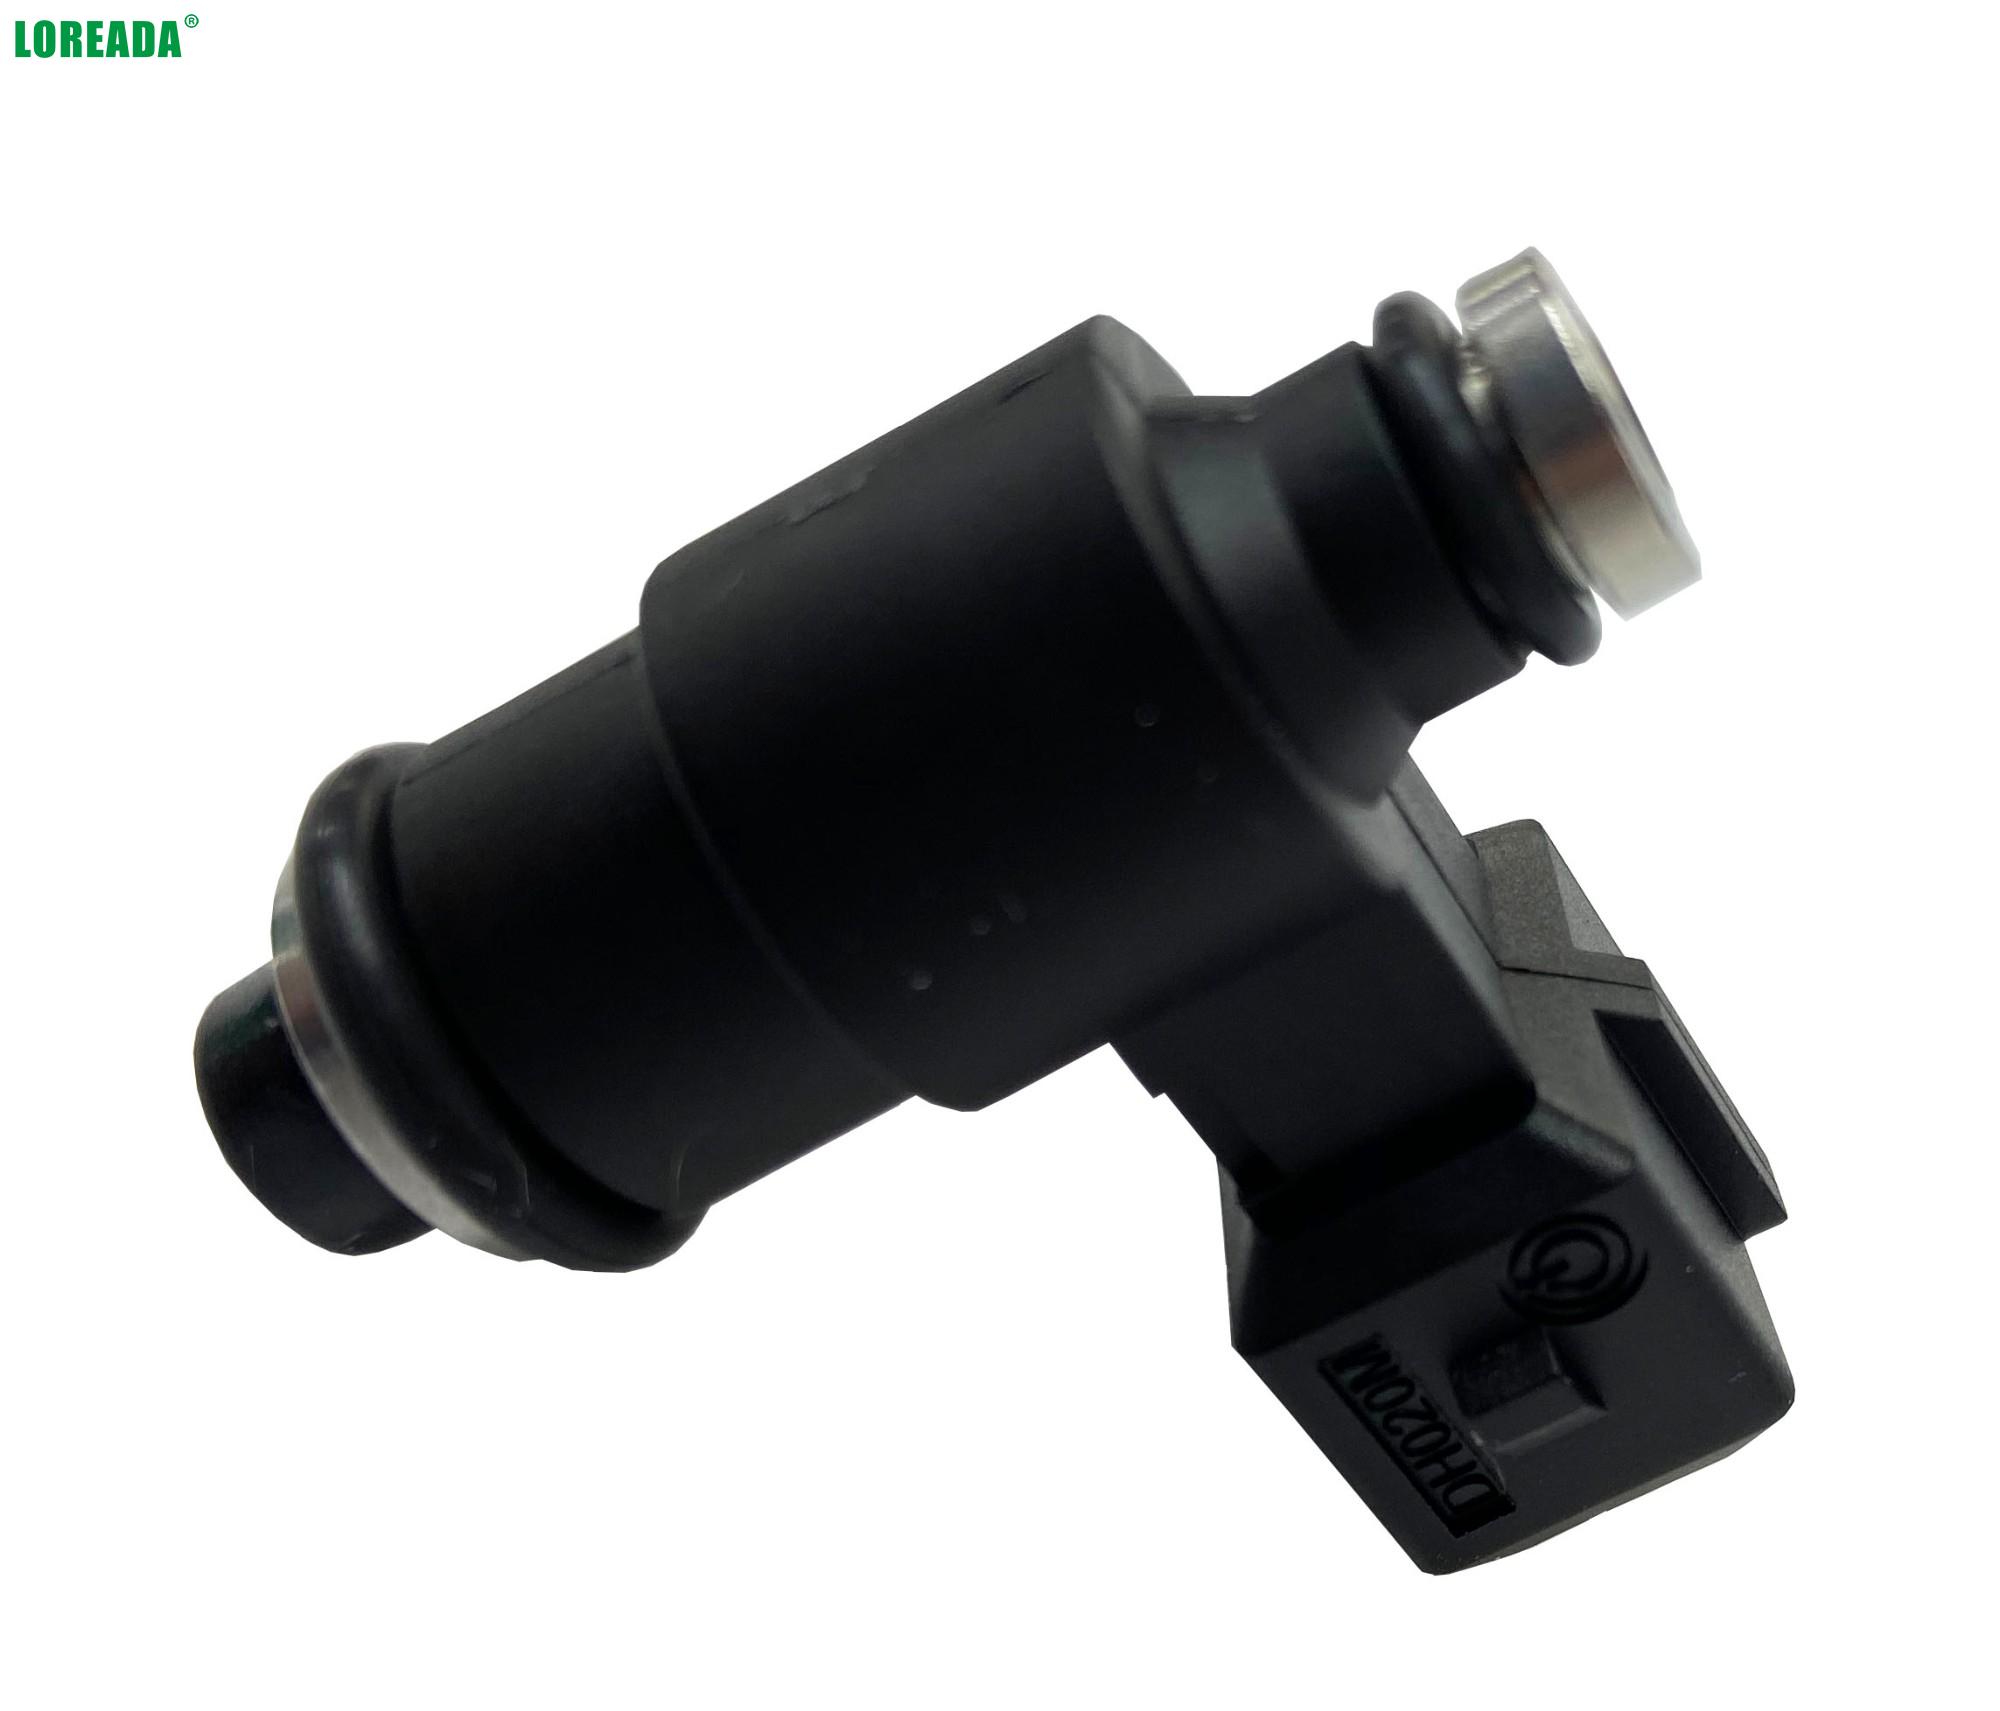 MEV1-030-A High Quality Motorcycle Fuel Injector Fits For YAMAHA HONDA SUZUKImotorcycle Mechanical Motorcycle Throttle Body Assembly Throttle Valve